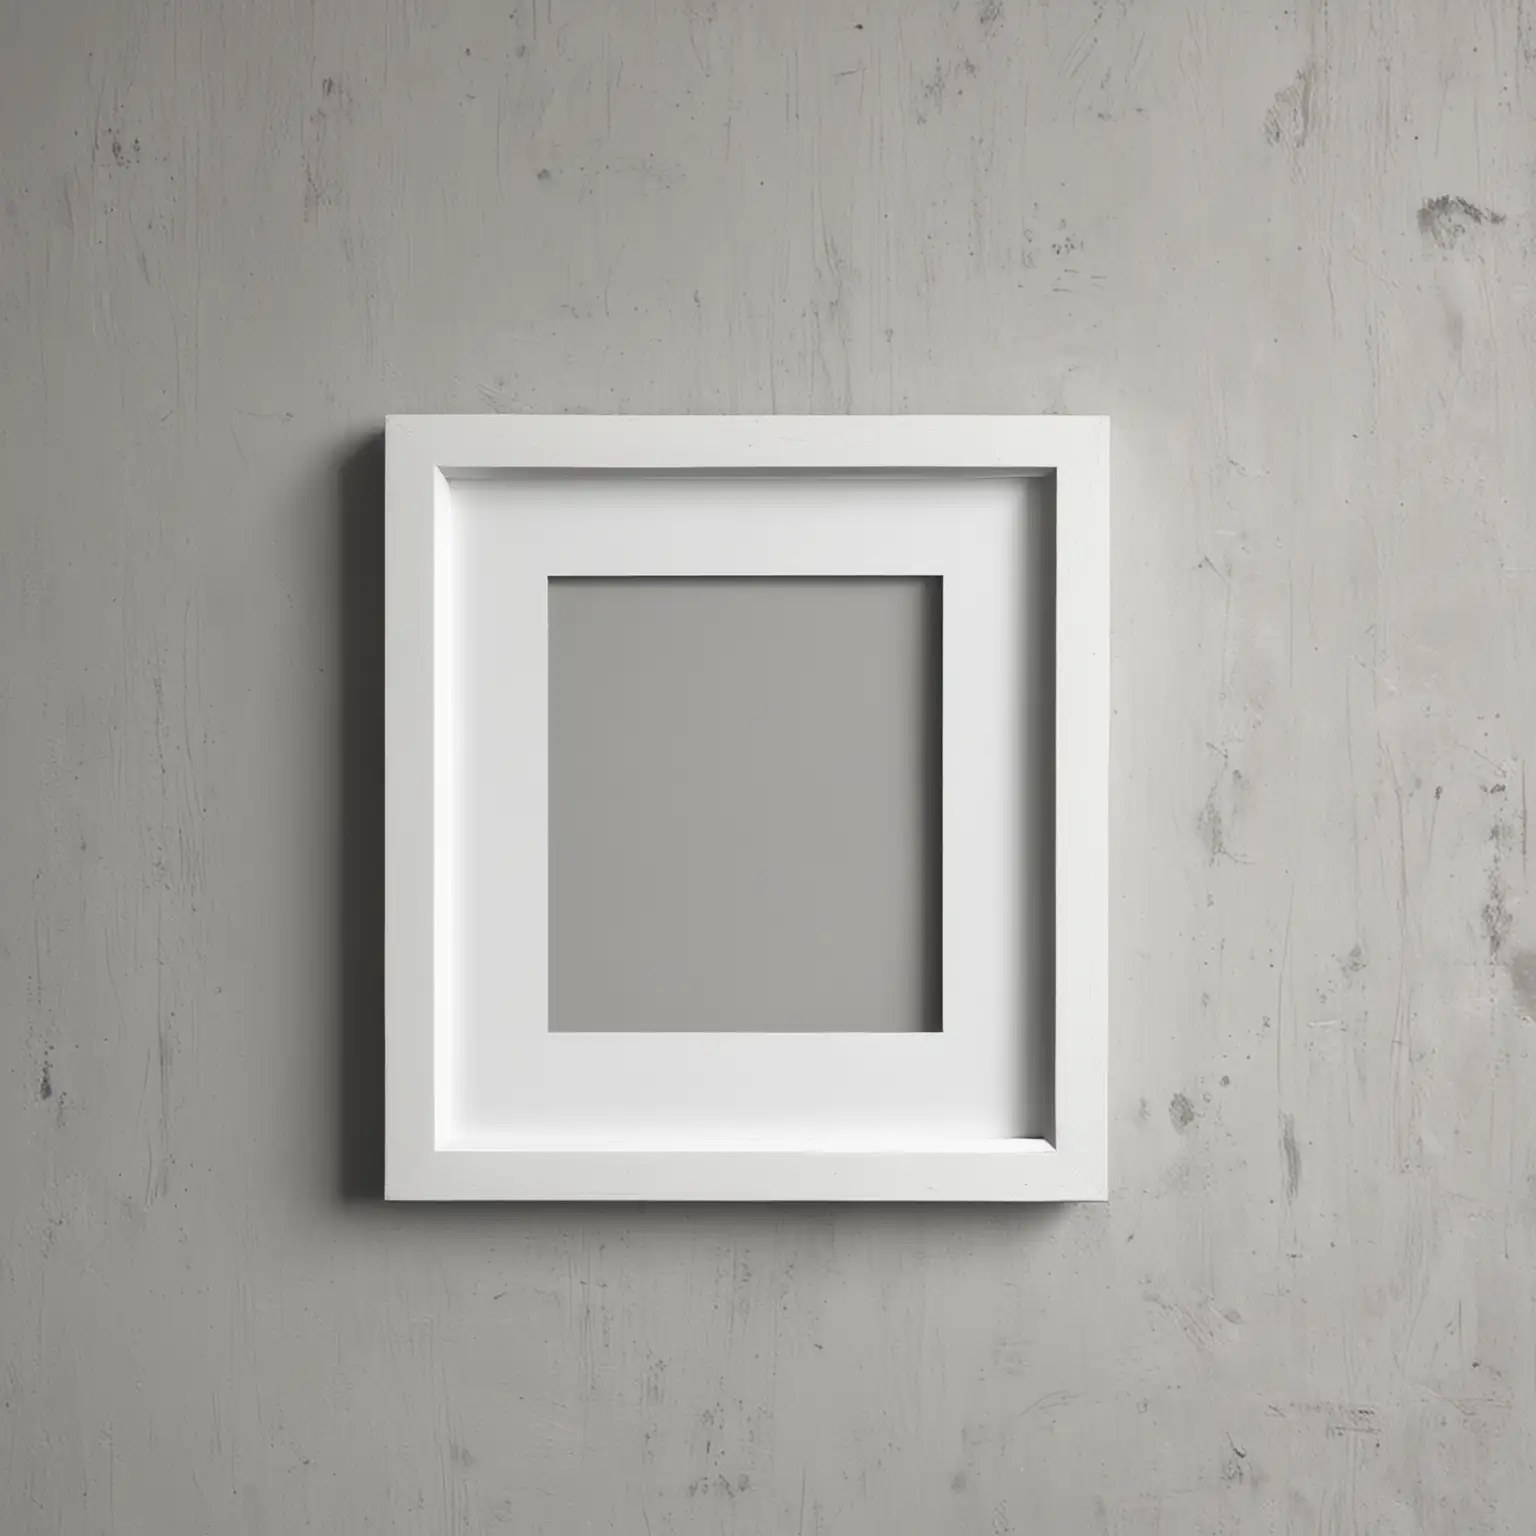 Minimalist-White-Picture-Frame-Hanging-on-Wall